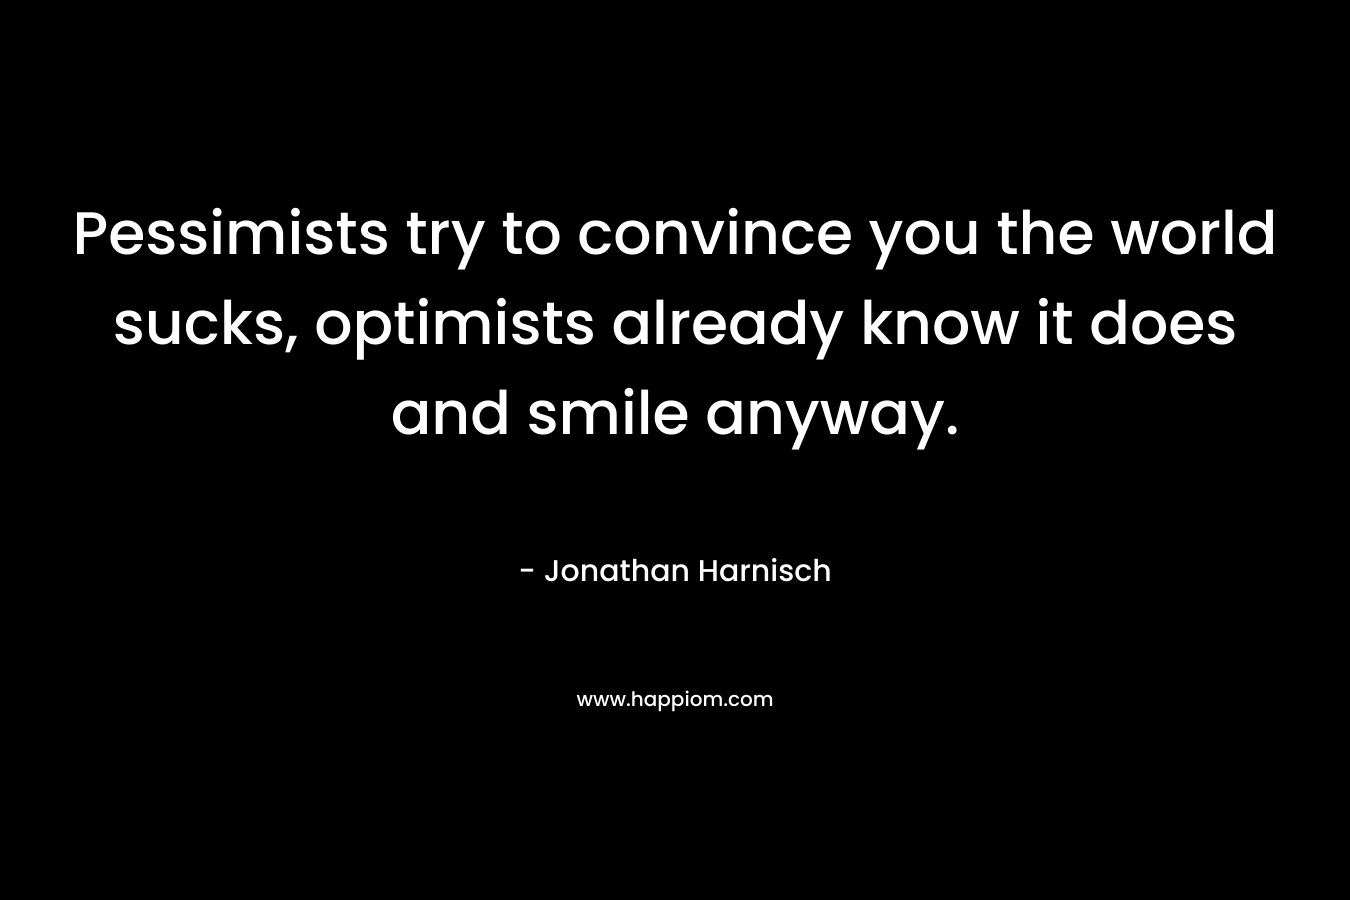 Pessimists try to convince you the world sucks, optimists already know it does and smile anyway. – Jonathan Harnisch